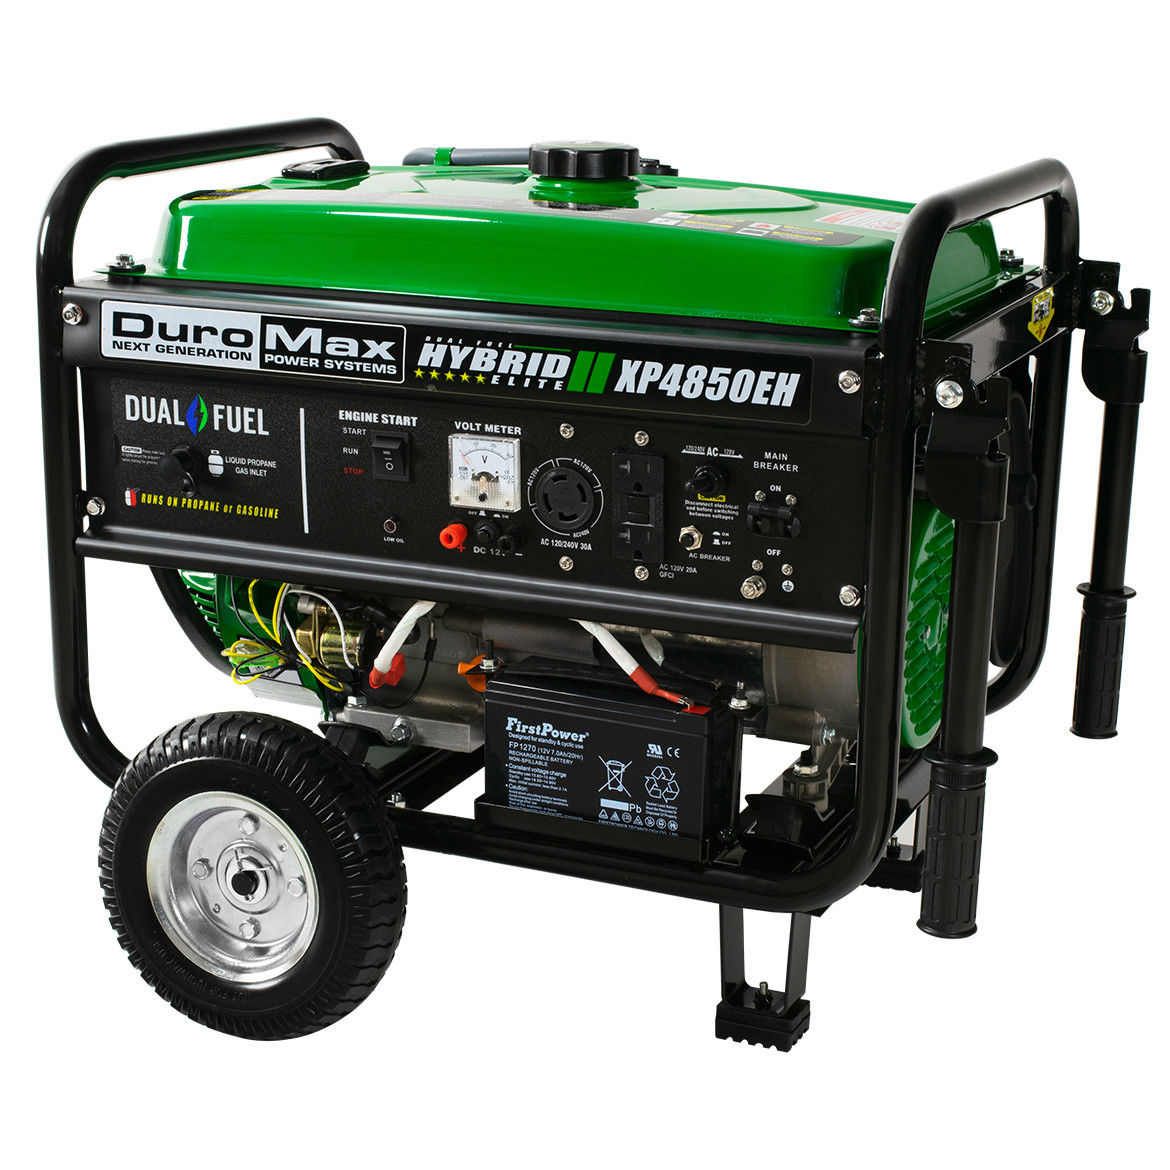 DuroMax Hybrid Portable Dual Fuel Propane/Gas Camping Generator Only $254.99!